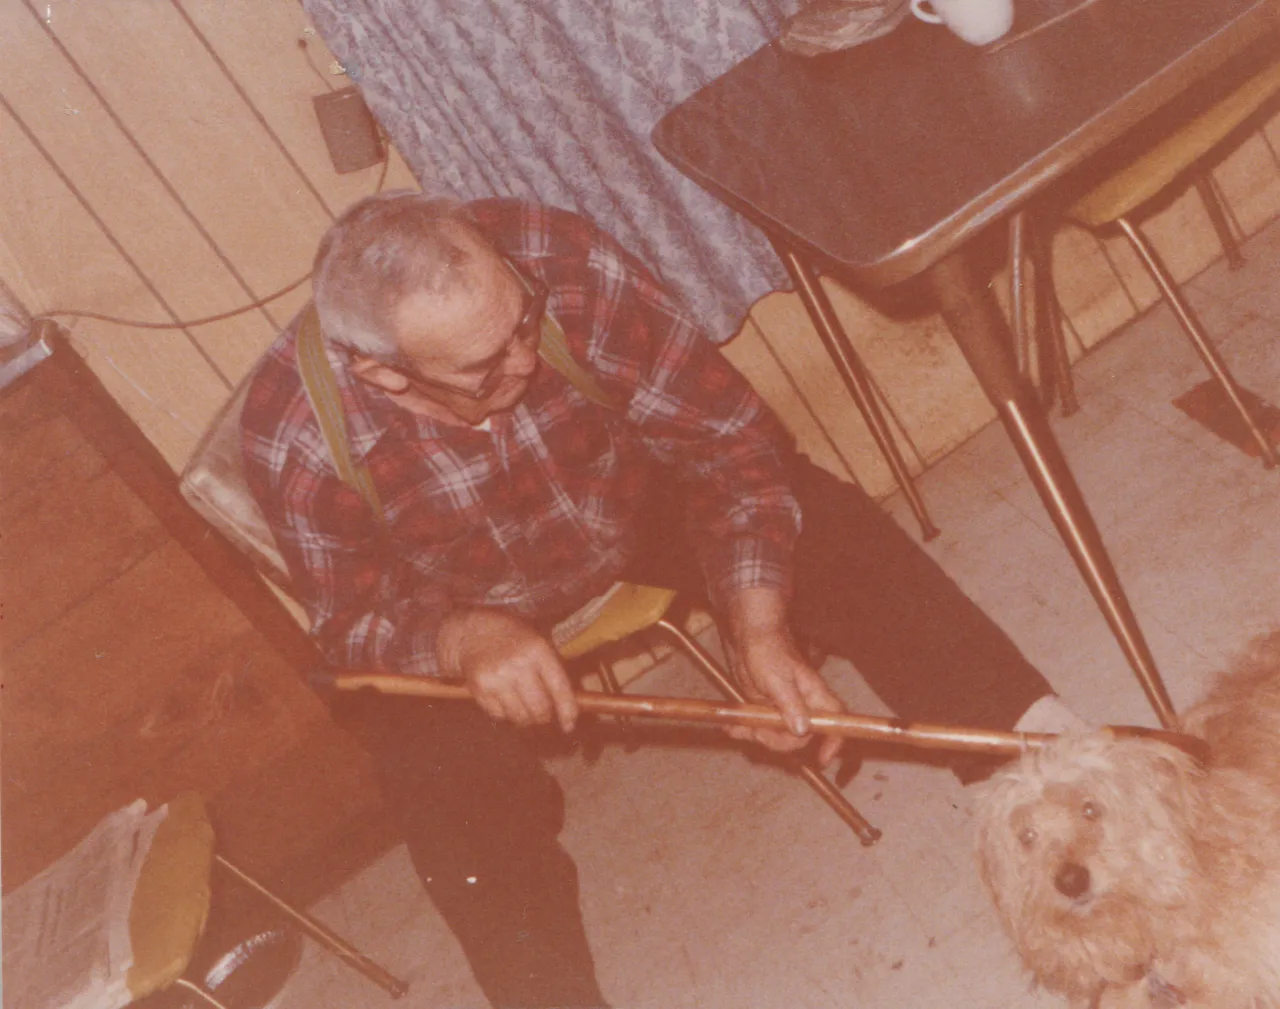 1974 - Walter Hunter (and his dog), the dad or grandpa of Ron who married Marilyn Morehead, she thinks this is from that year, 2pics-1.png